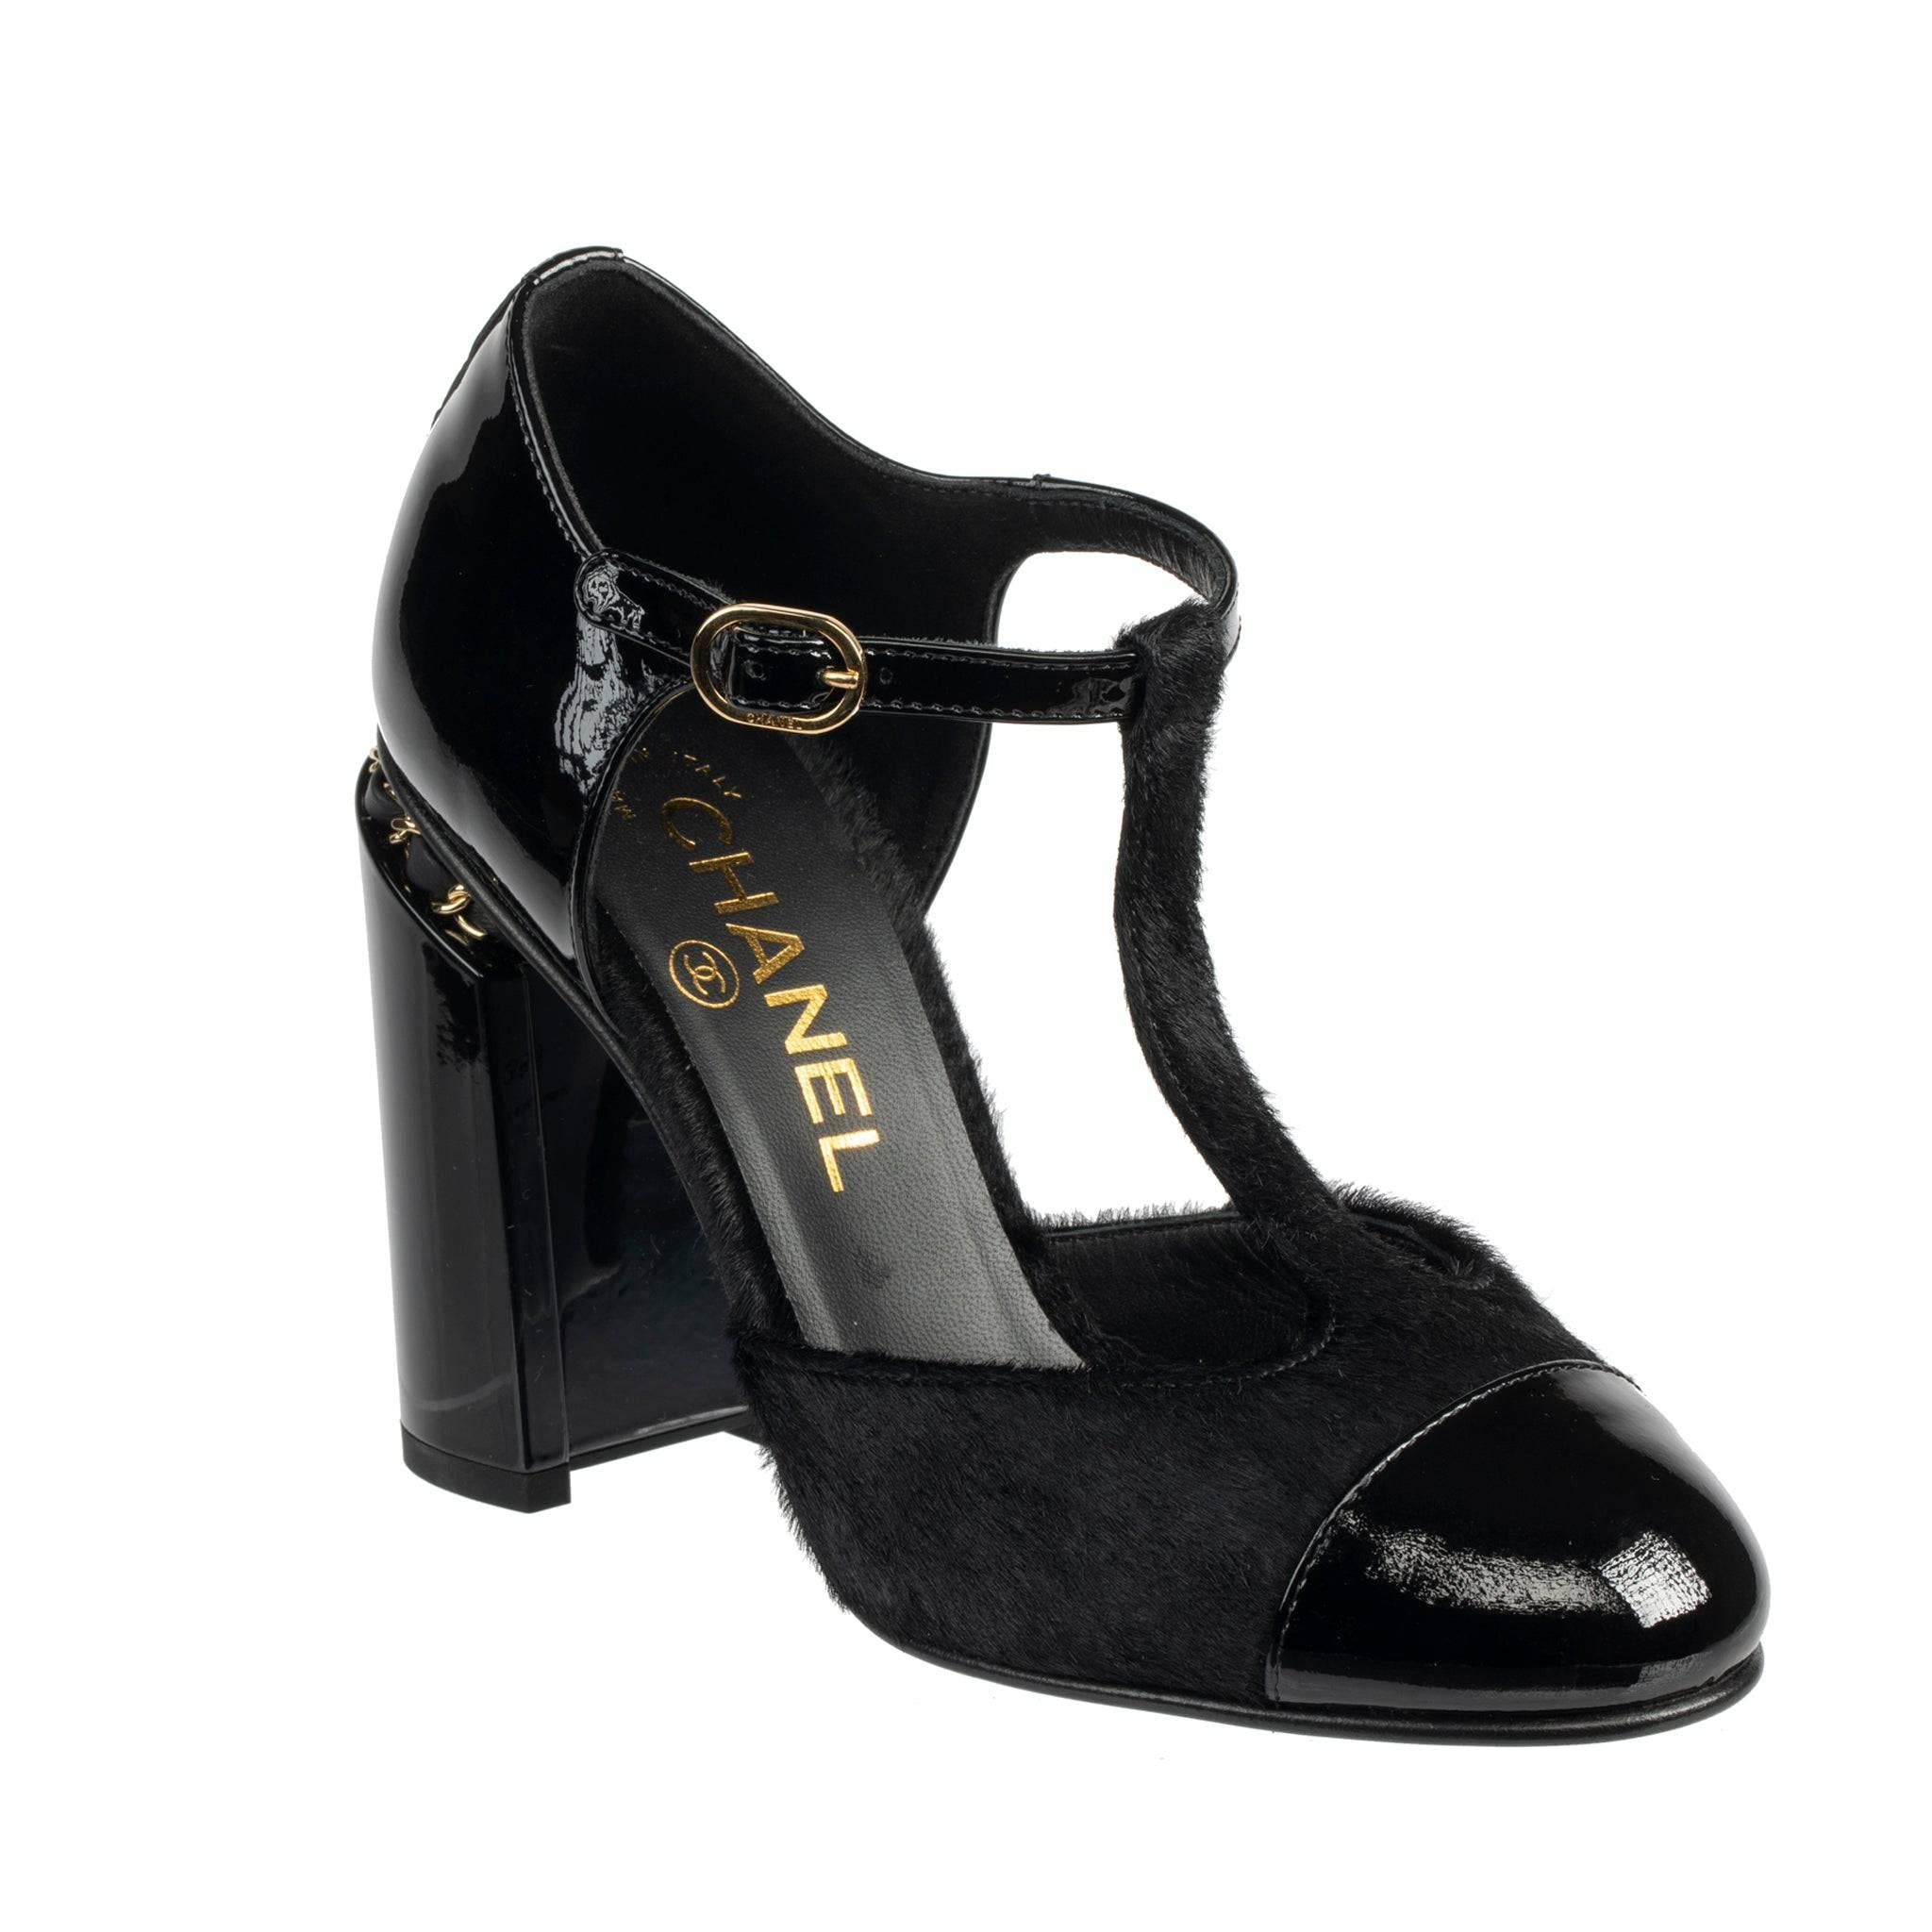 Brand:

Chanel

Product:

Strap Heel With Chain Details

Size:

36 Fr

Colour:

Black

Heel:

10 Cm

Material:

Smooth Patent Leather & Pony Hair

Condition:

Pristine; New Or Never Worn

Accompanied By:

Chanel Box, Two Chanel Dustbags, Tag &